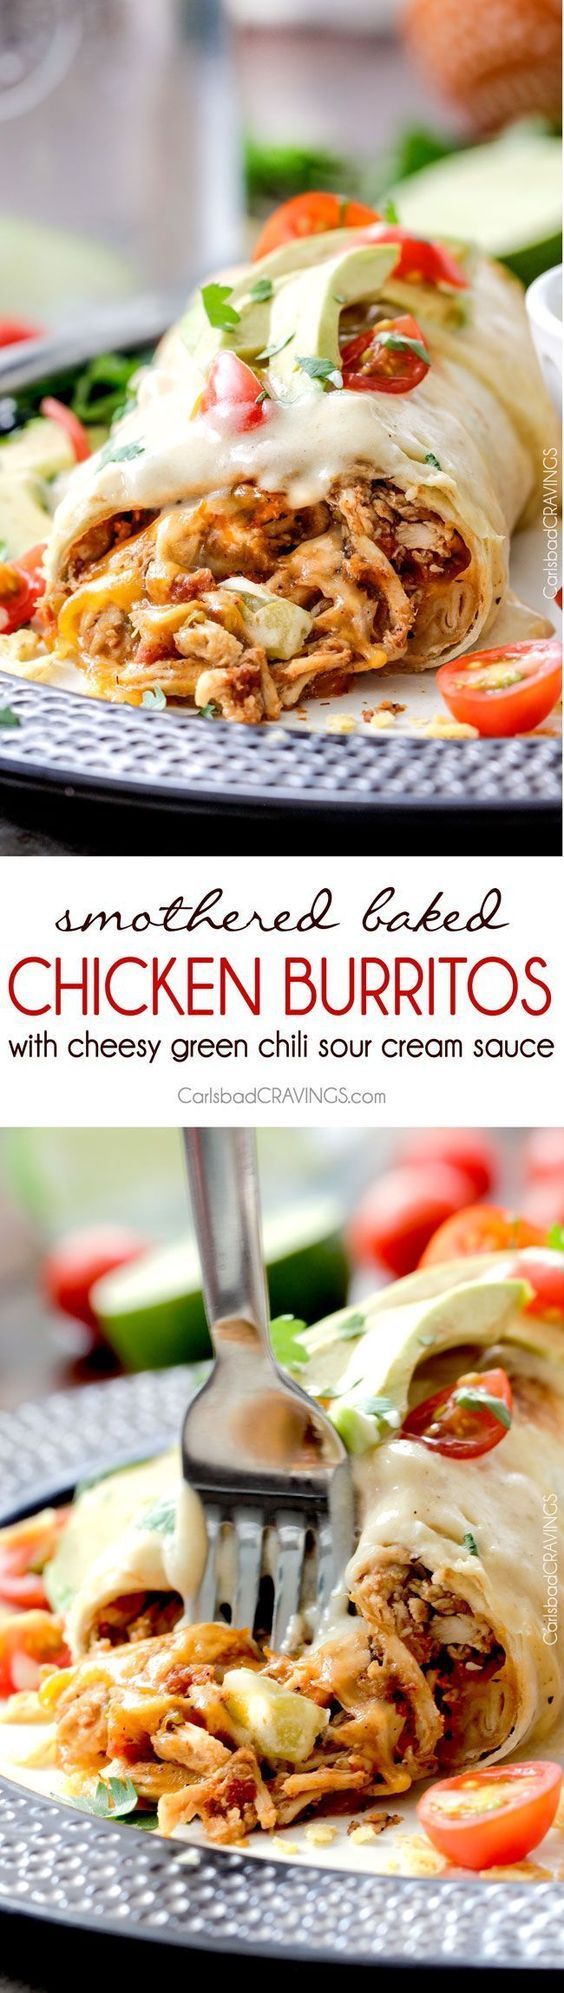 Smothered Baked Chicken Burritos AKA “skinny chimichangas” are restaurant delicious without all the calories! made super easy by